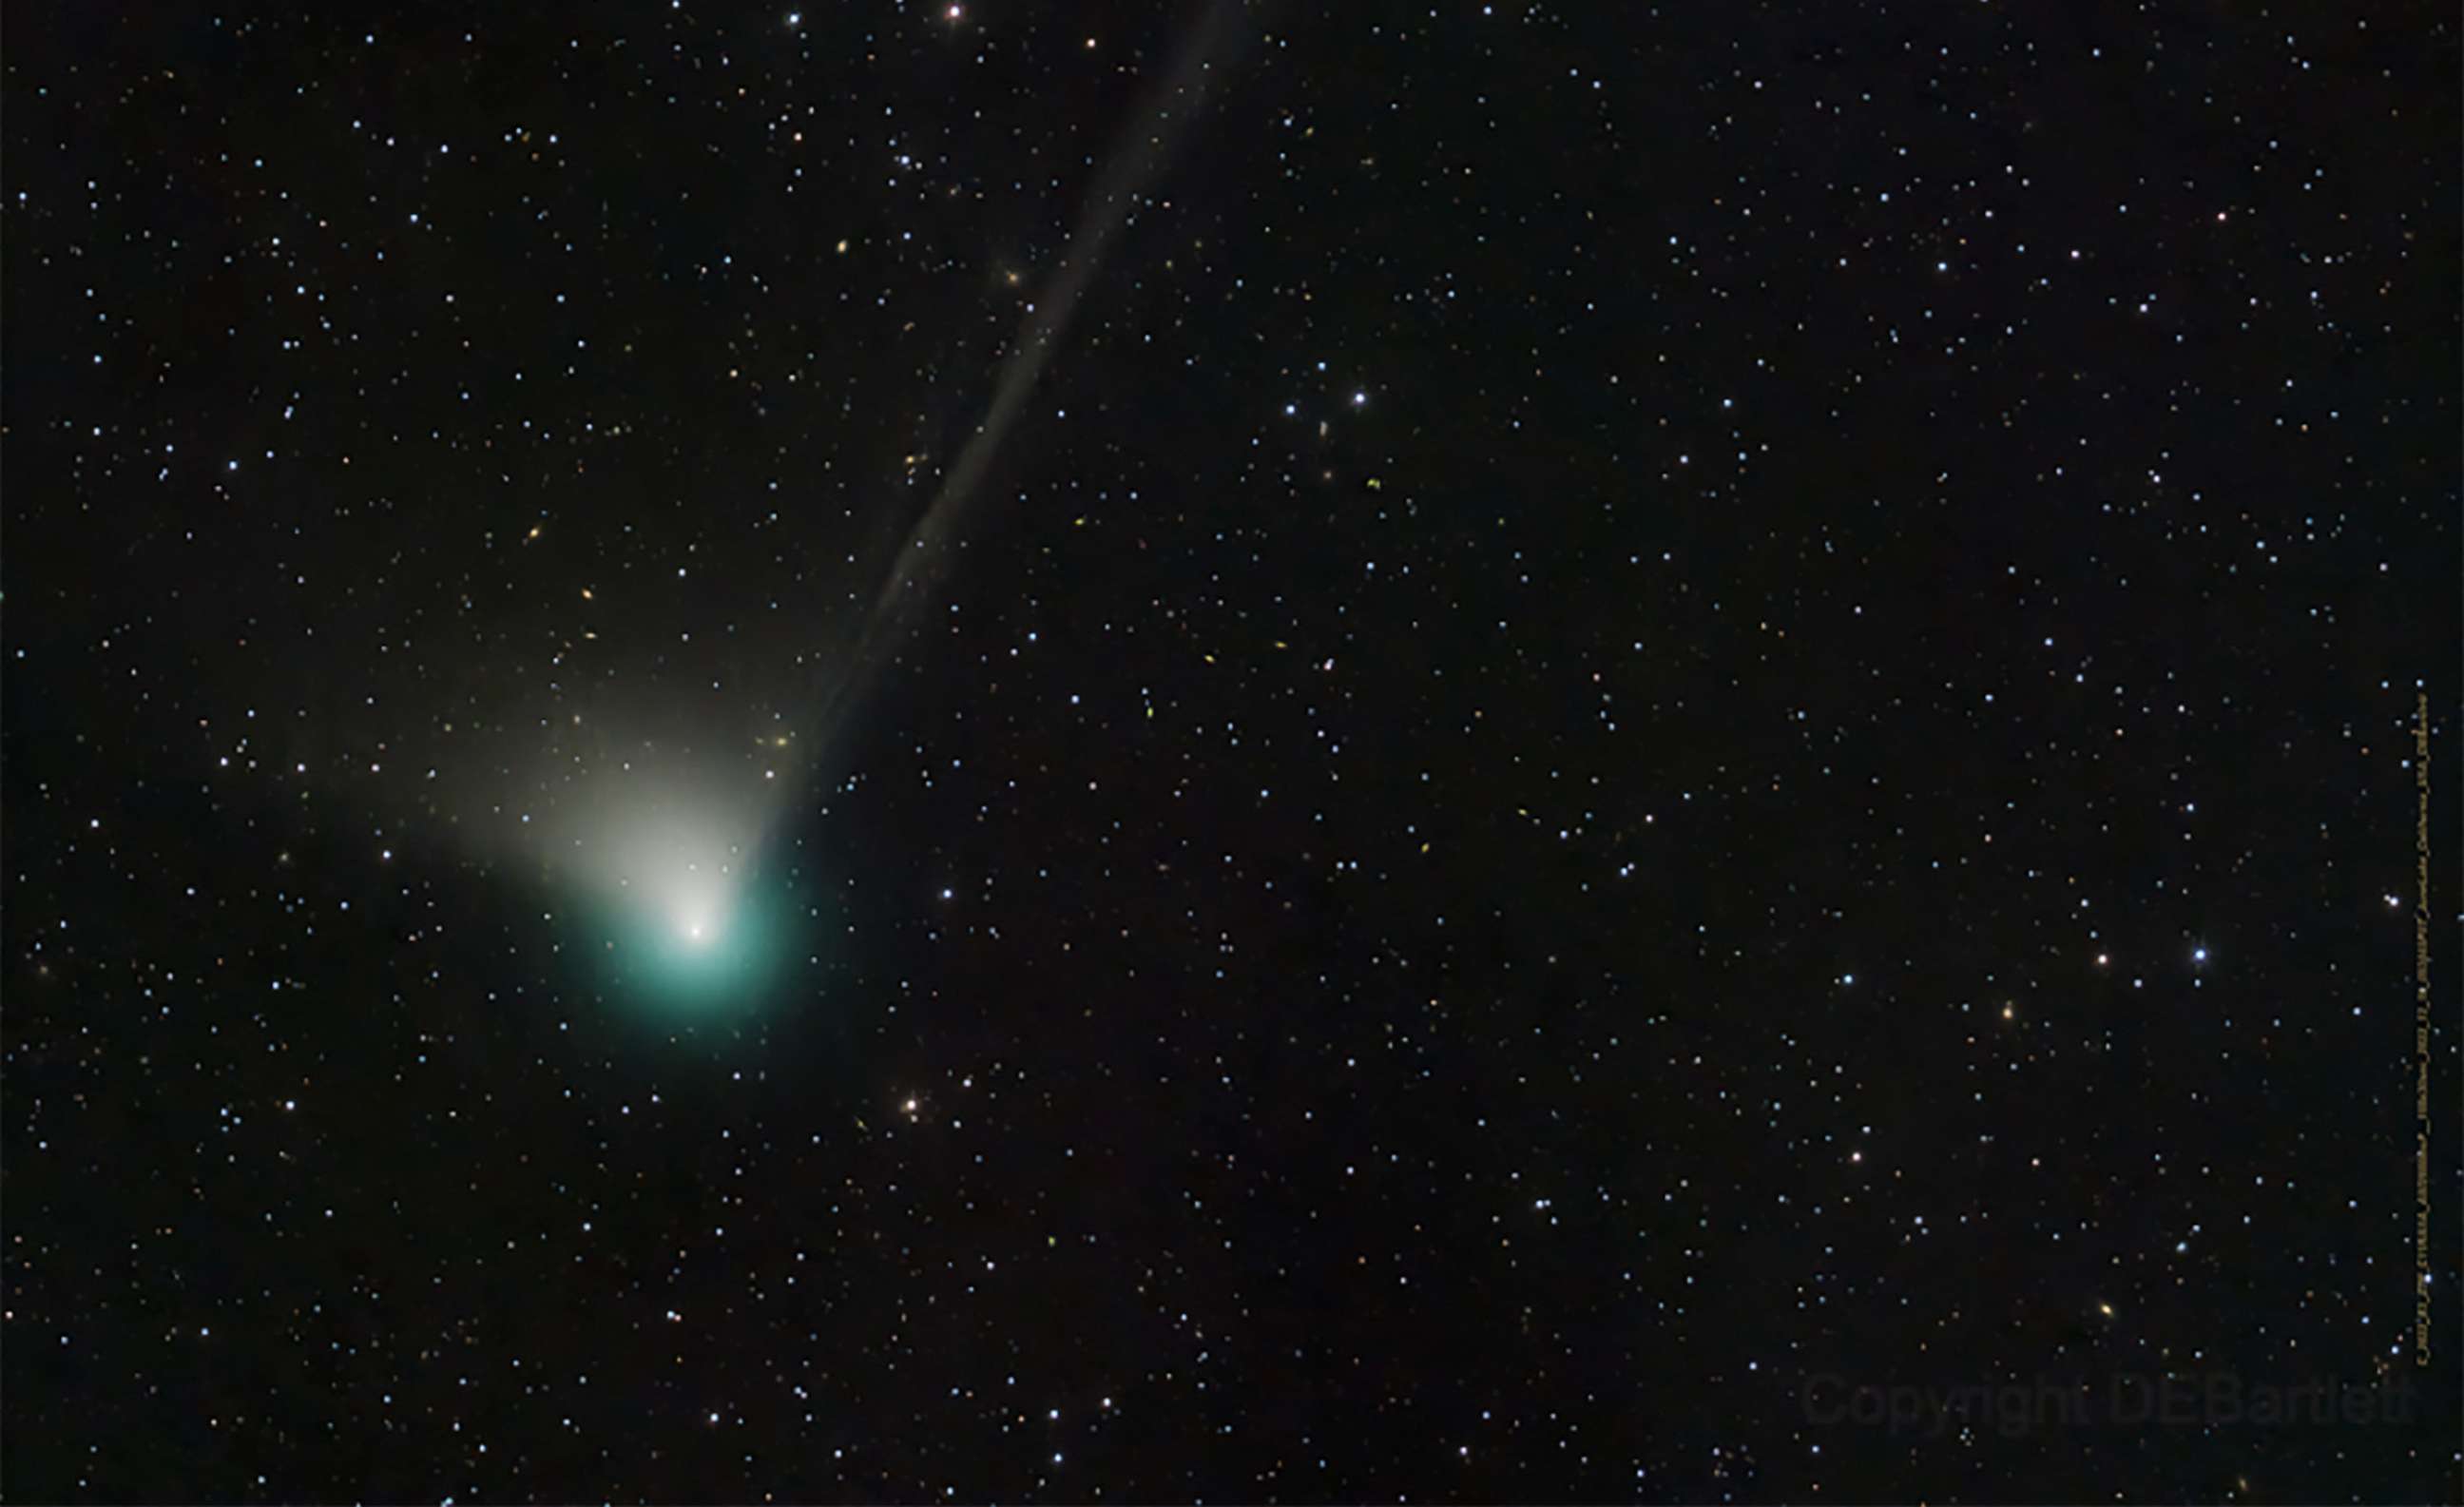 PHOTO: This handout picture obtained from the NASA website shows the Comet C/2022 E3 (ZTF) that was discovered by astronomers using the wide-field survey camera at the Zwicky Transient Facility.